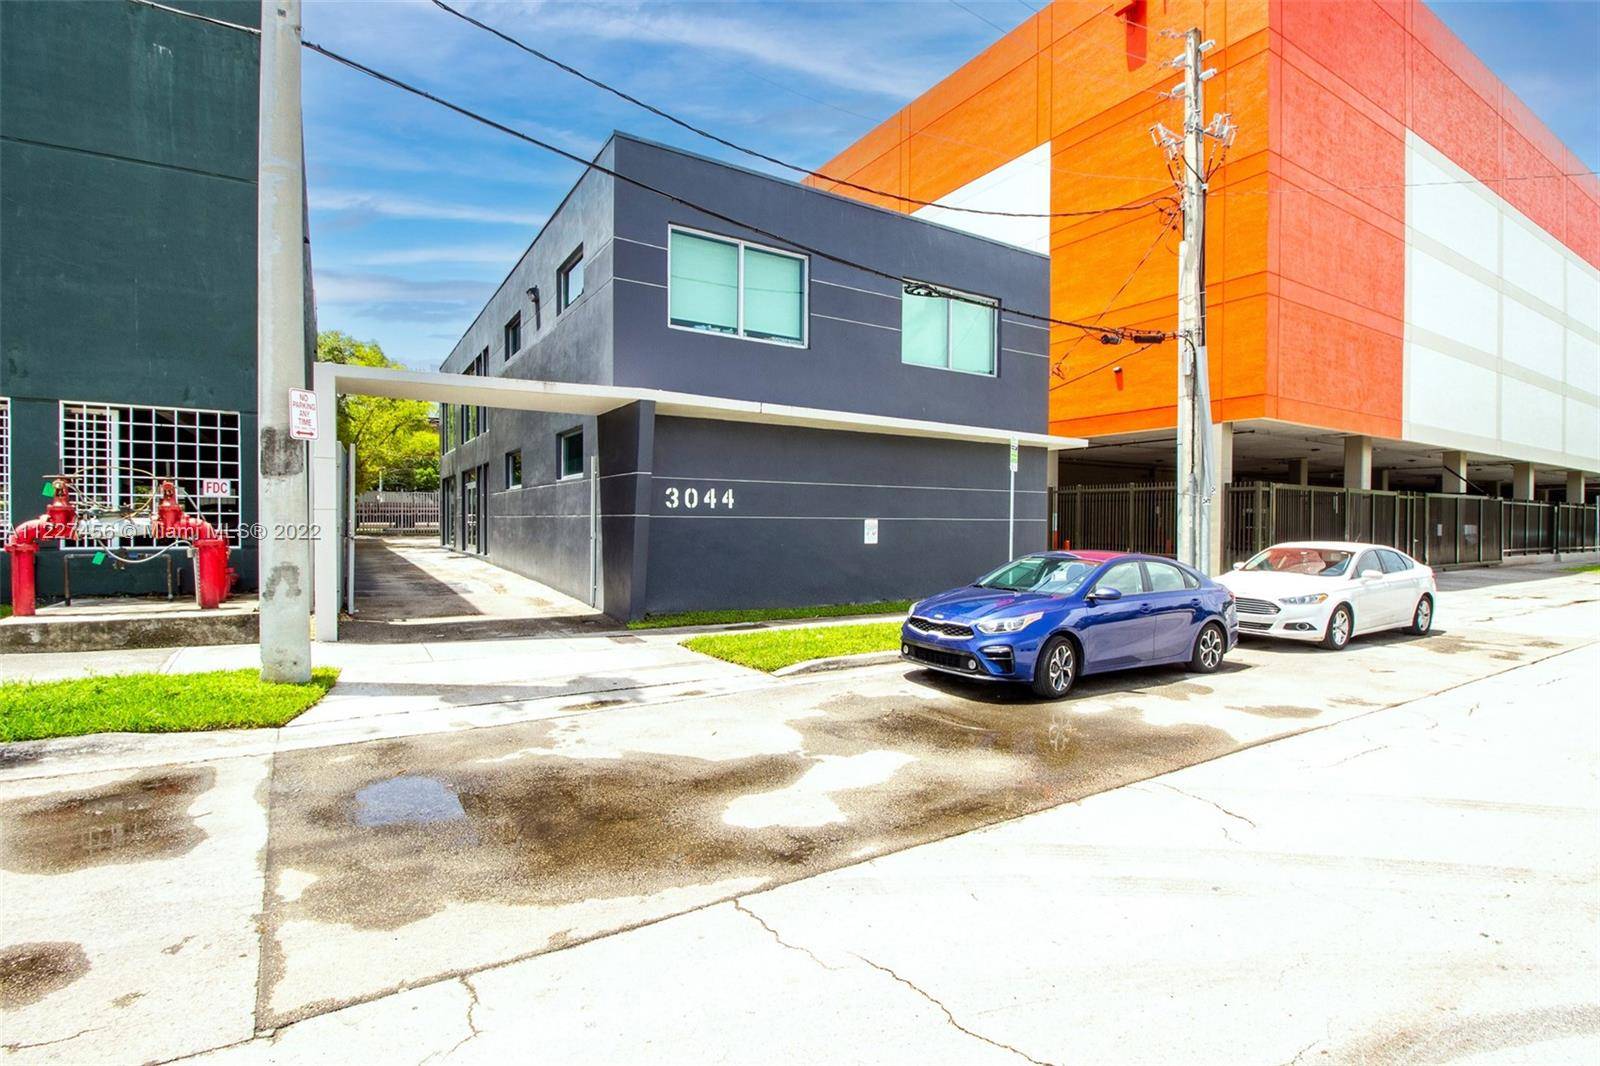 Free Standing office space centrally located off of US1 and the Coconut Grove area, just two blocks away from the Coconut Grove Metro rail Station.